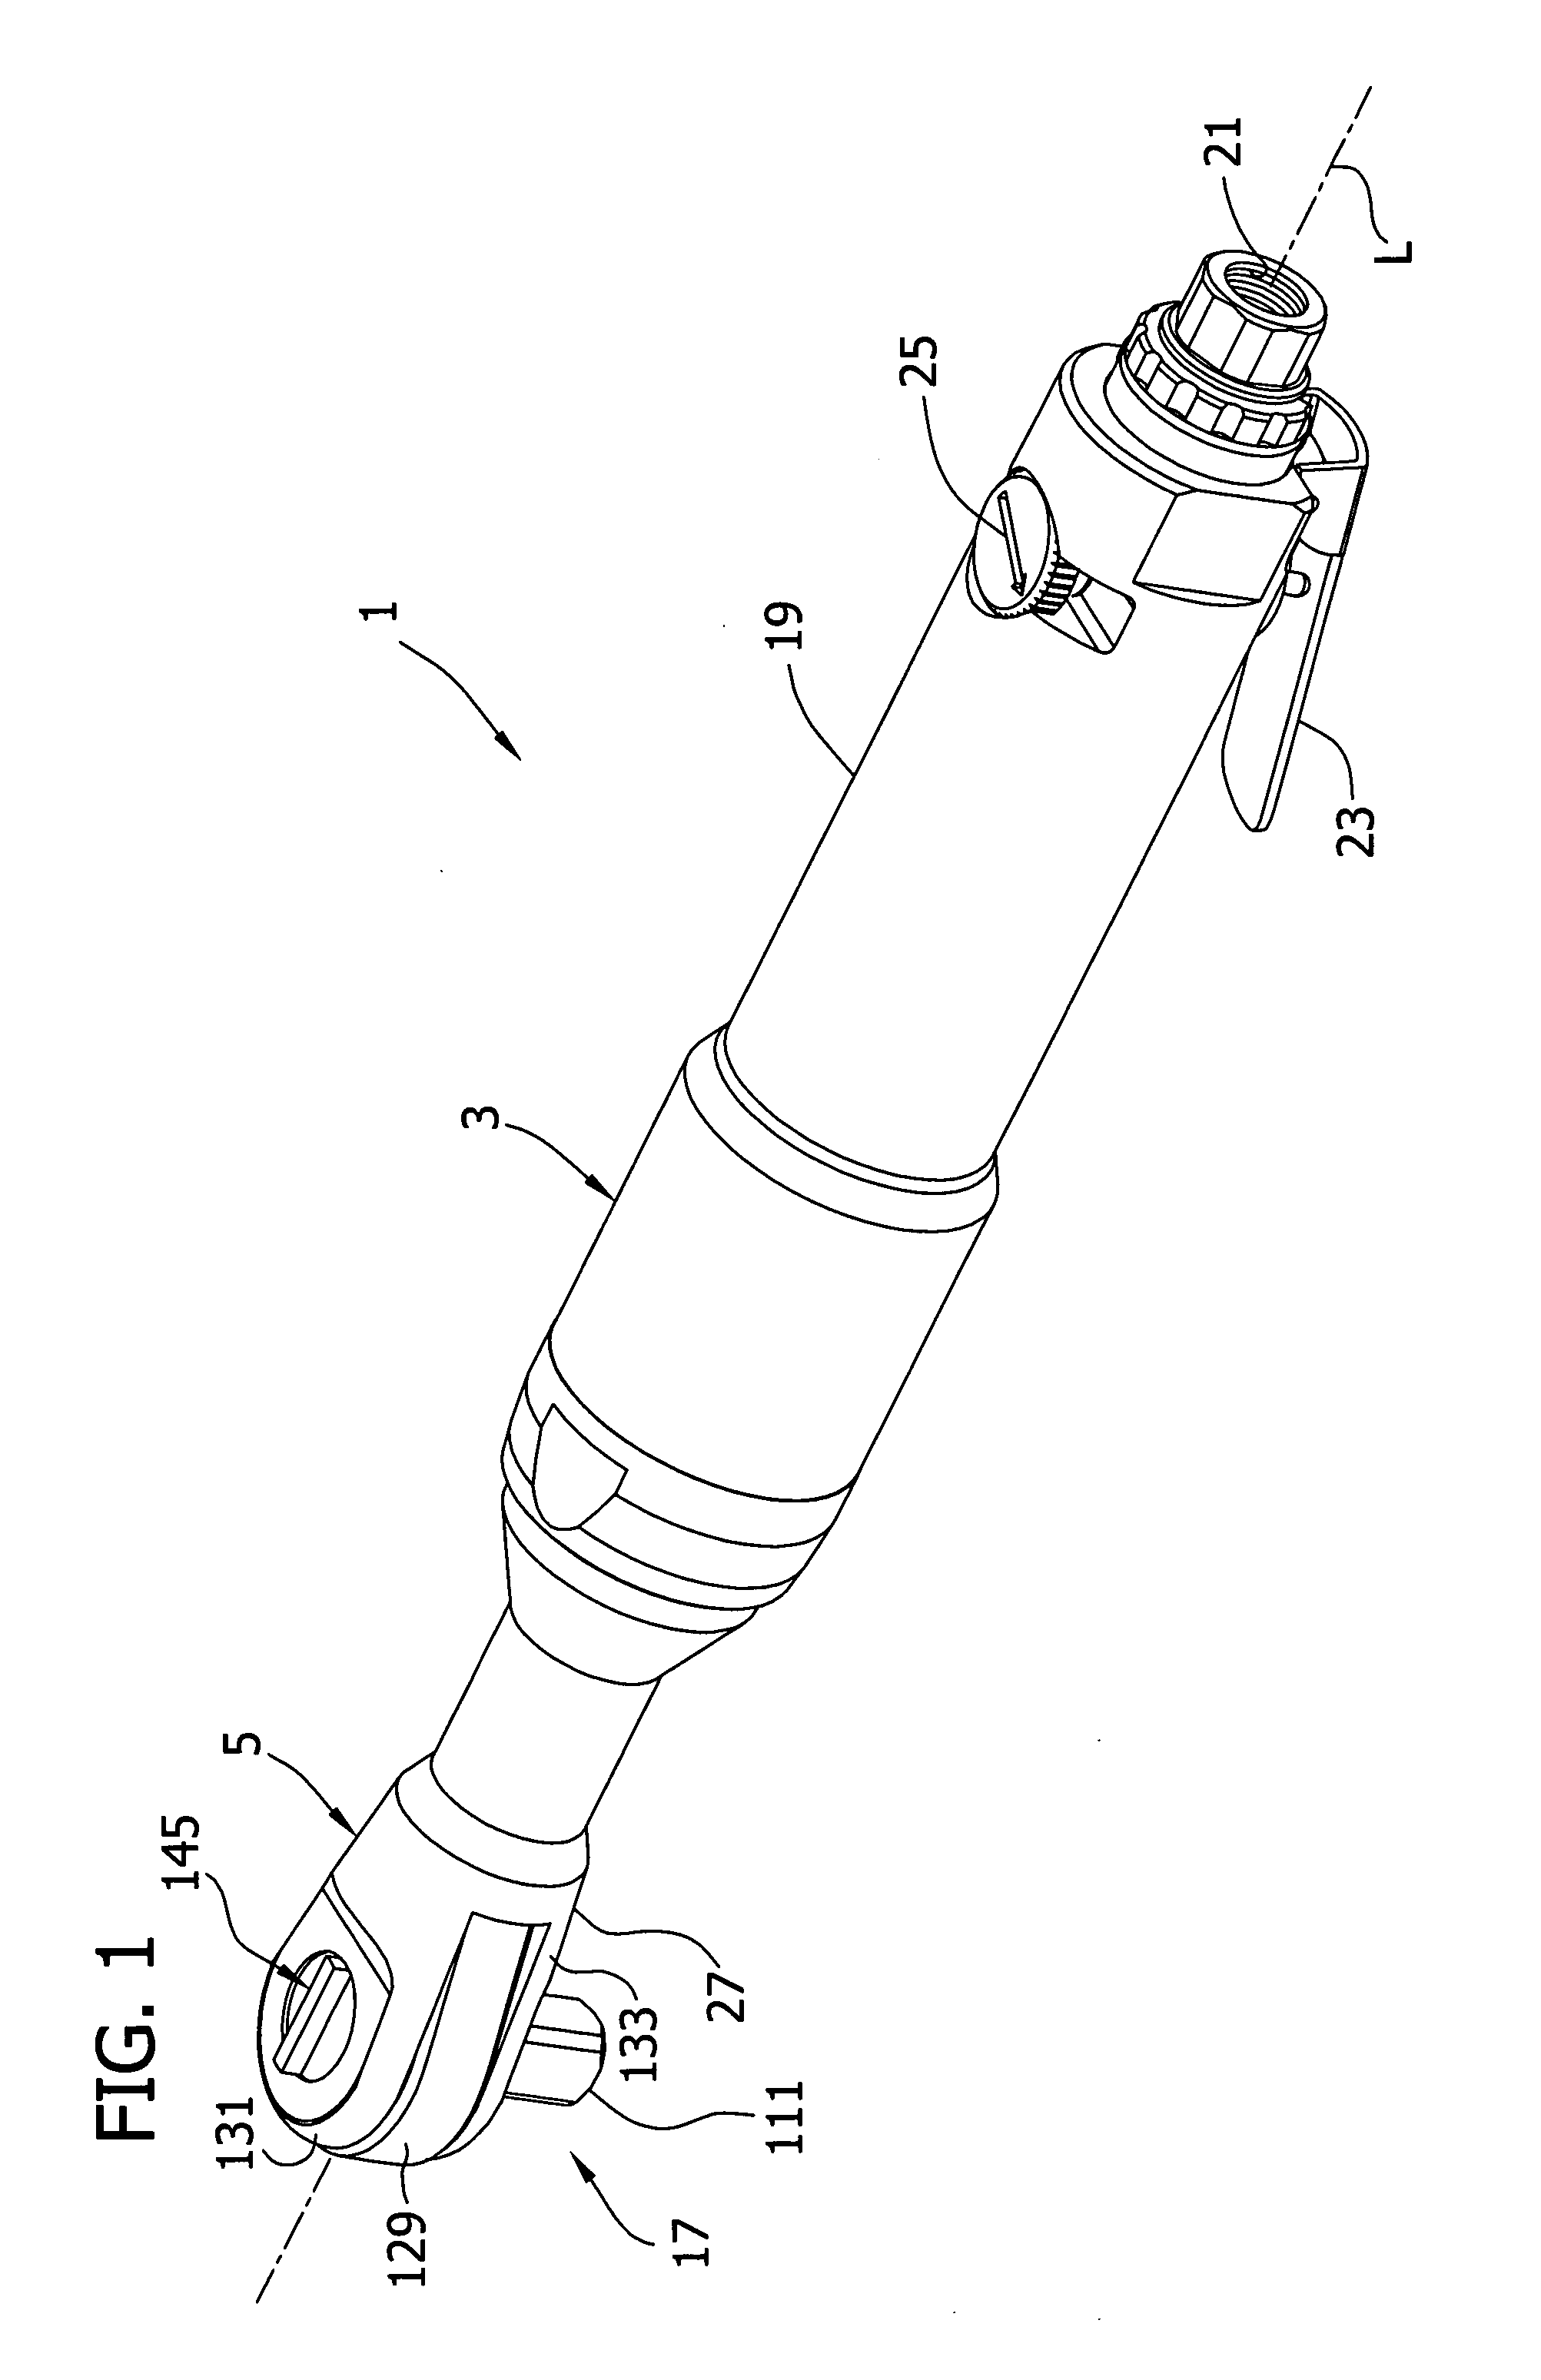 Hand tool with impact drive and speed reducing mechanism